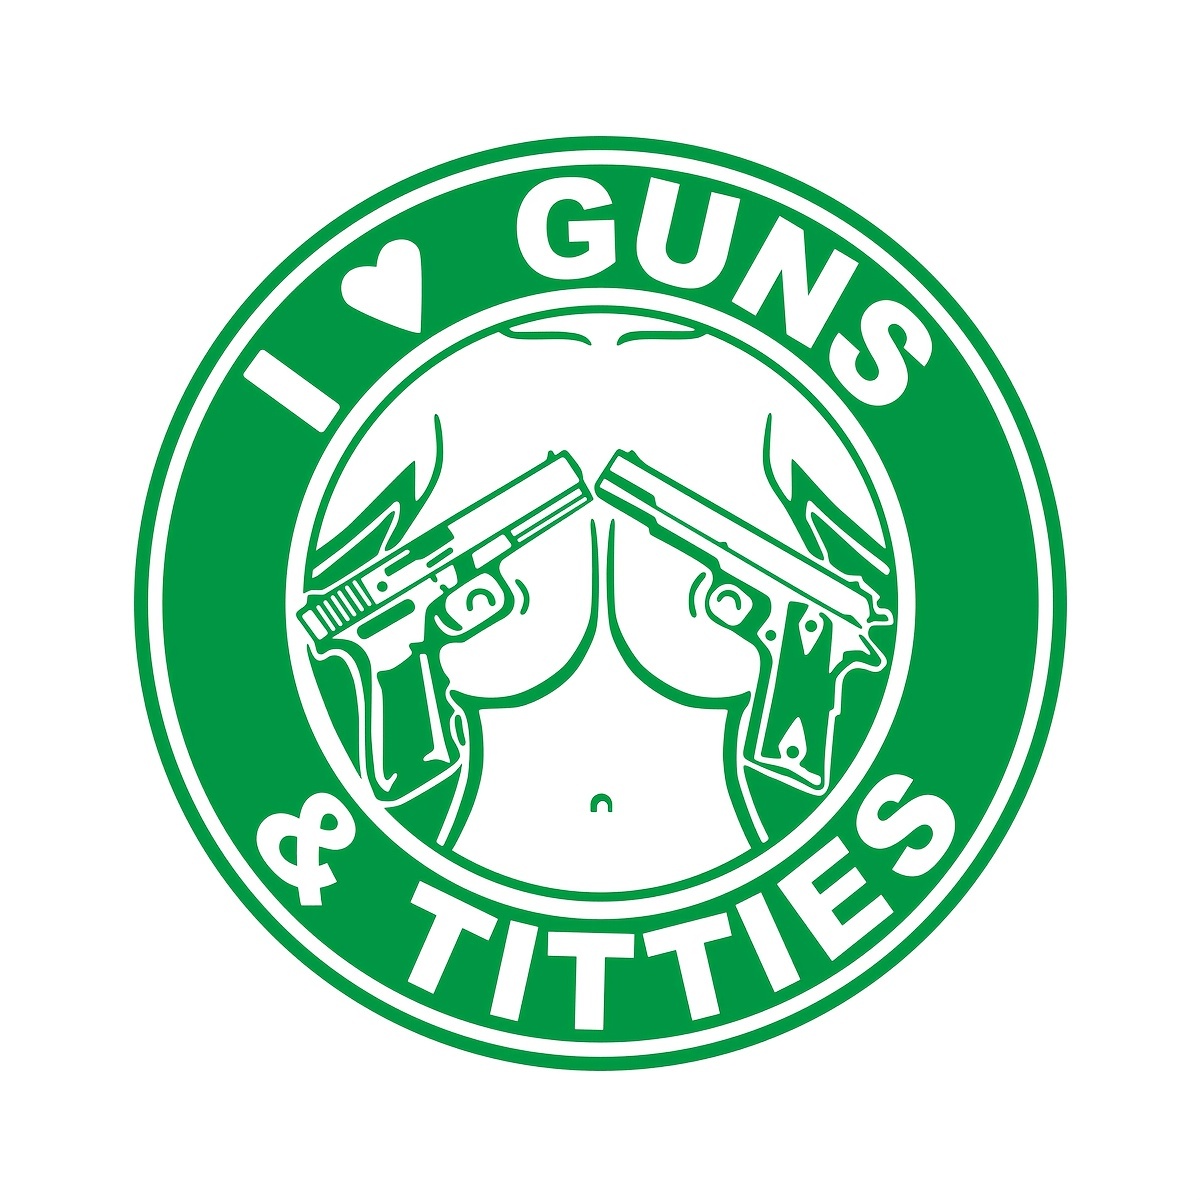 I Love Guns, Titties, & Beer Decal Sticker - Made in USA - The